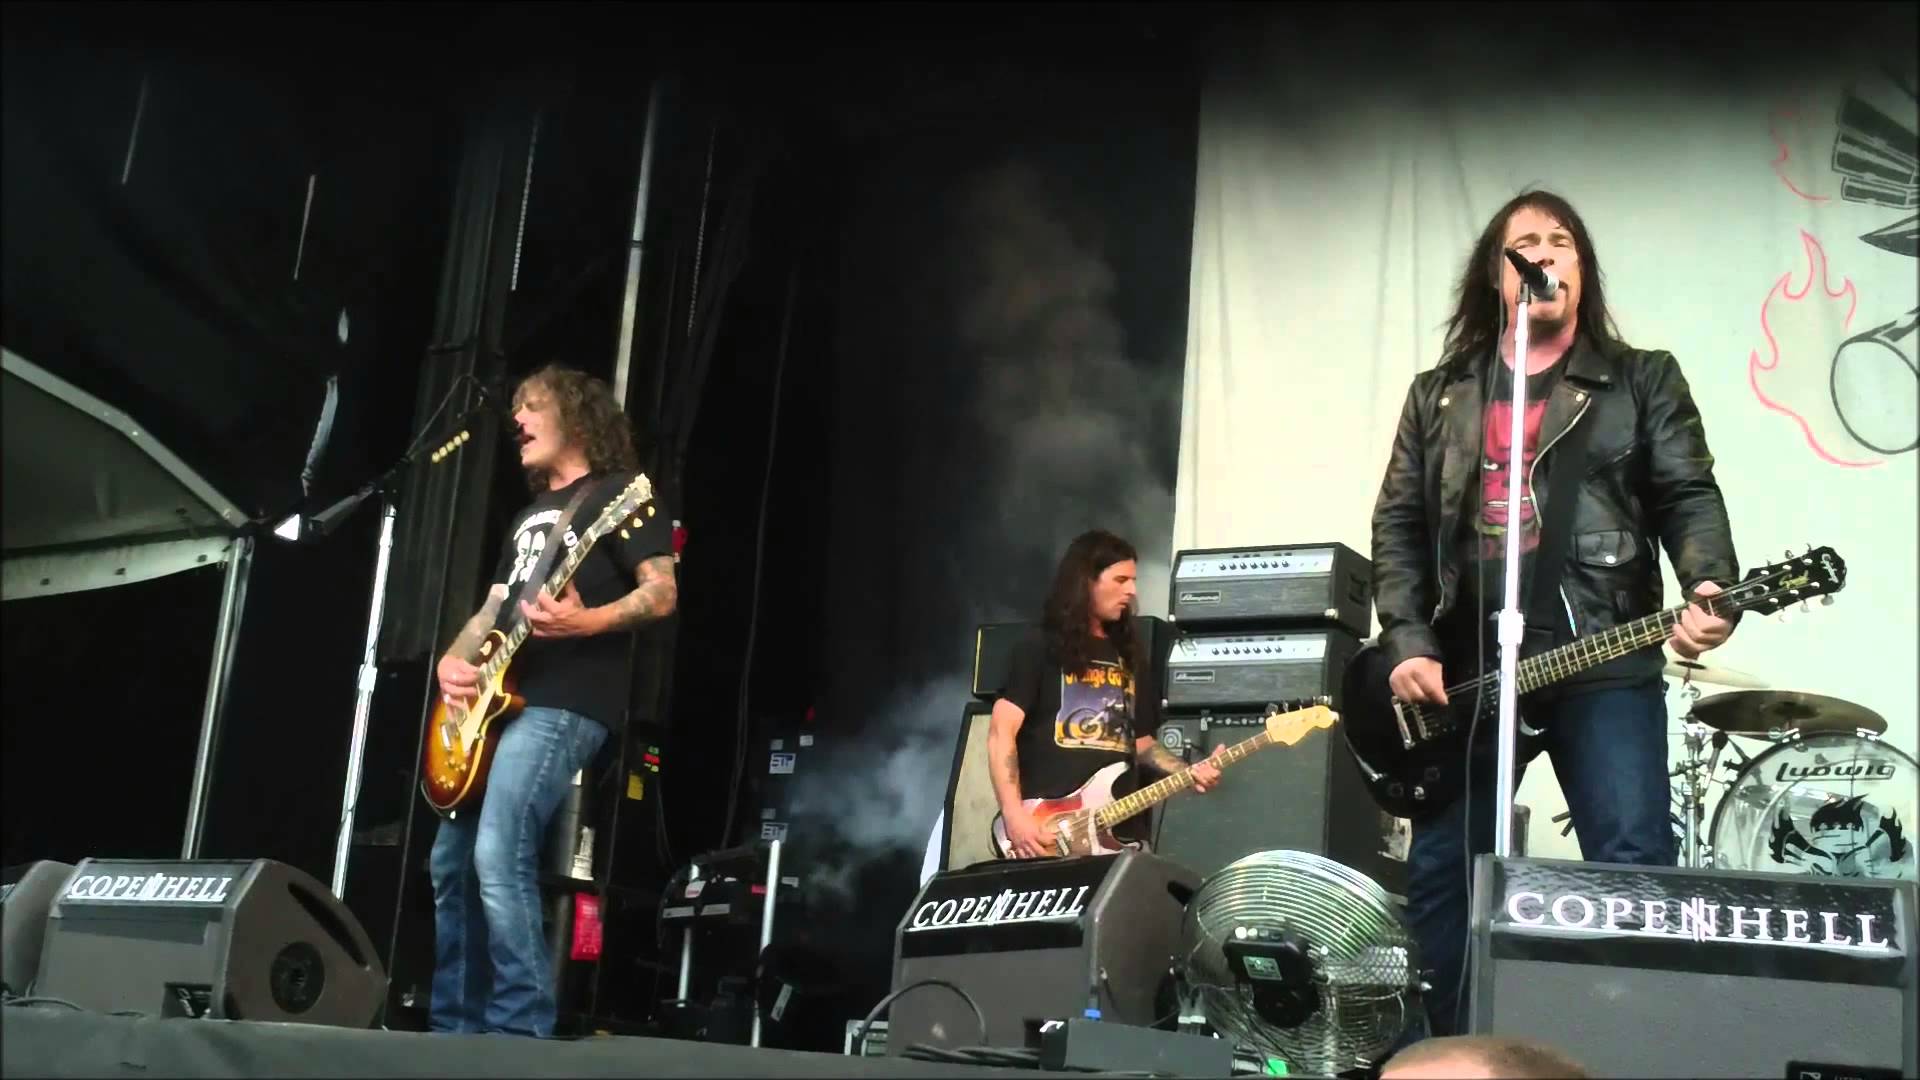 Monster Magnet - "Tractor" live at Copenhell 2014